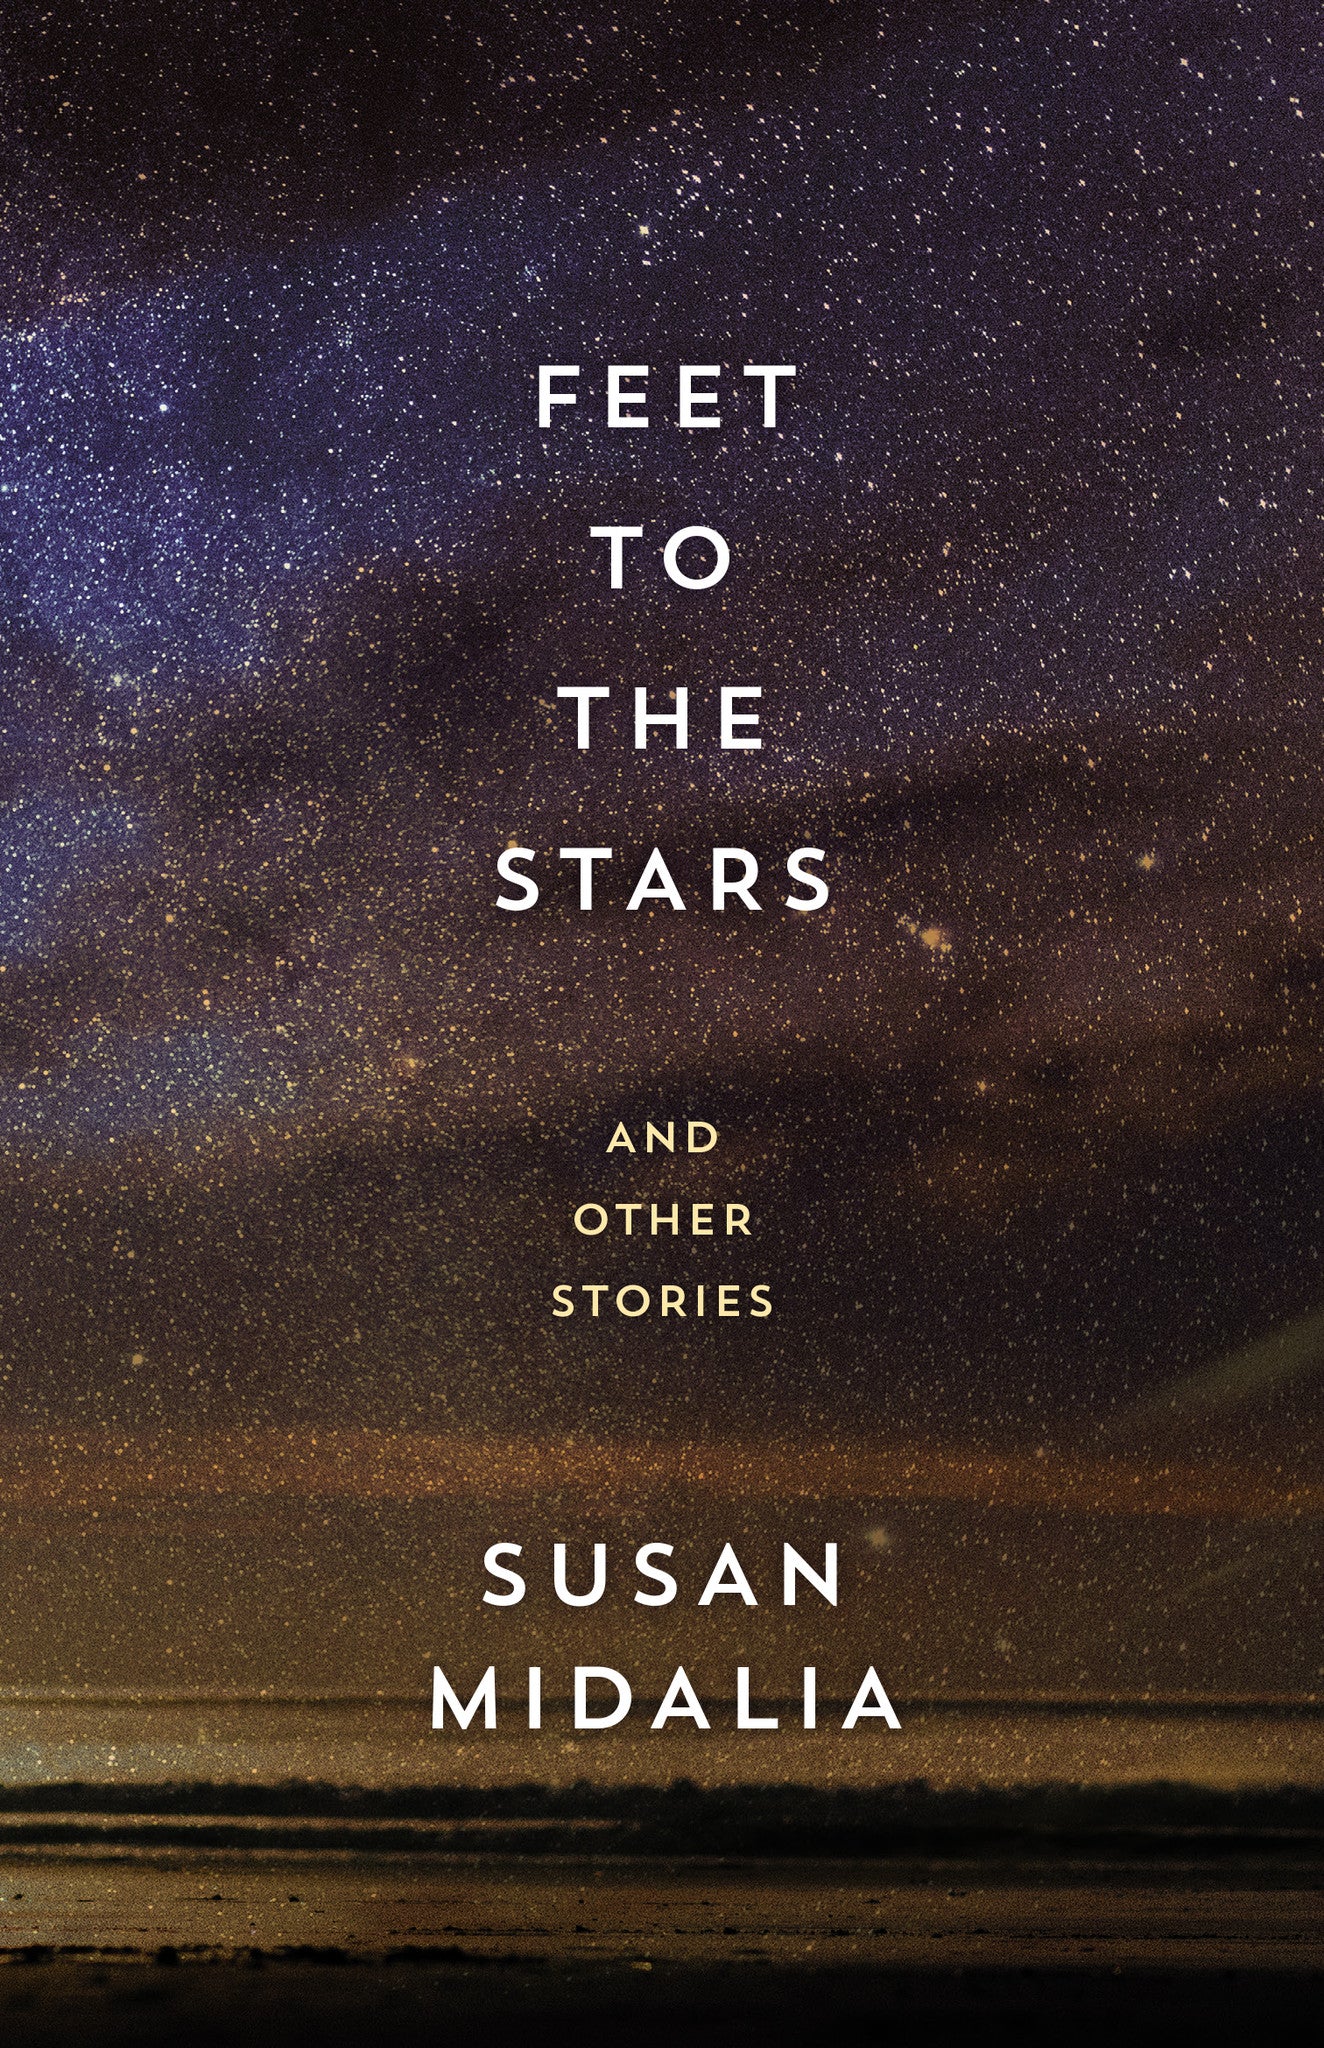 Feet to the Stars: and other stories